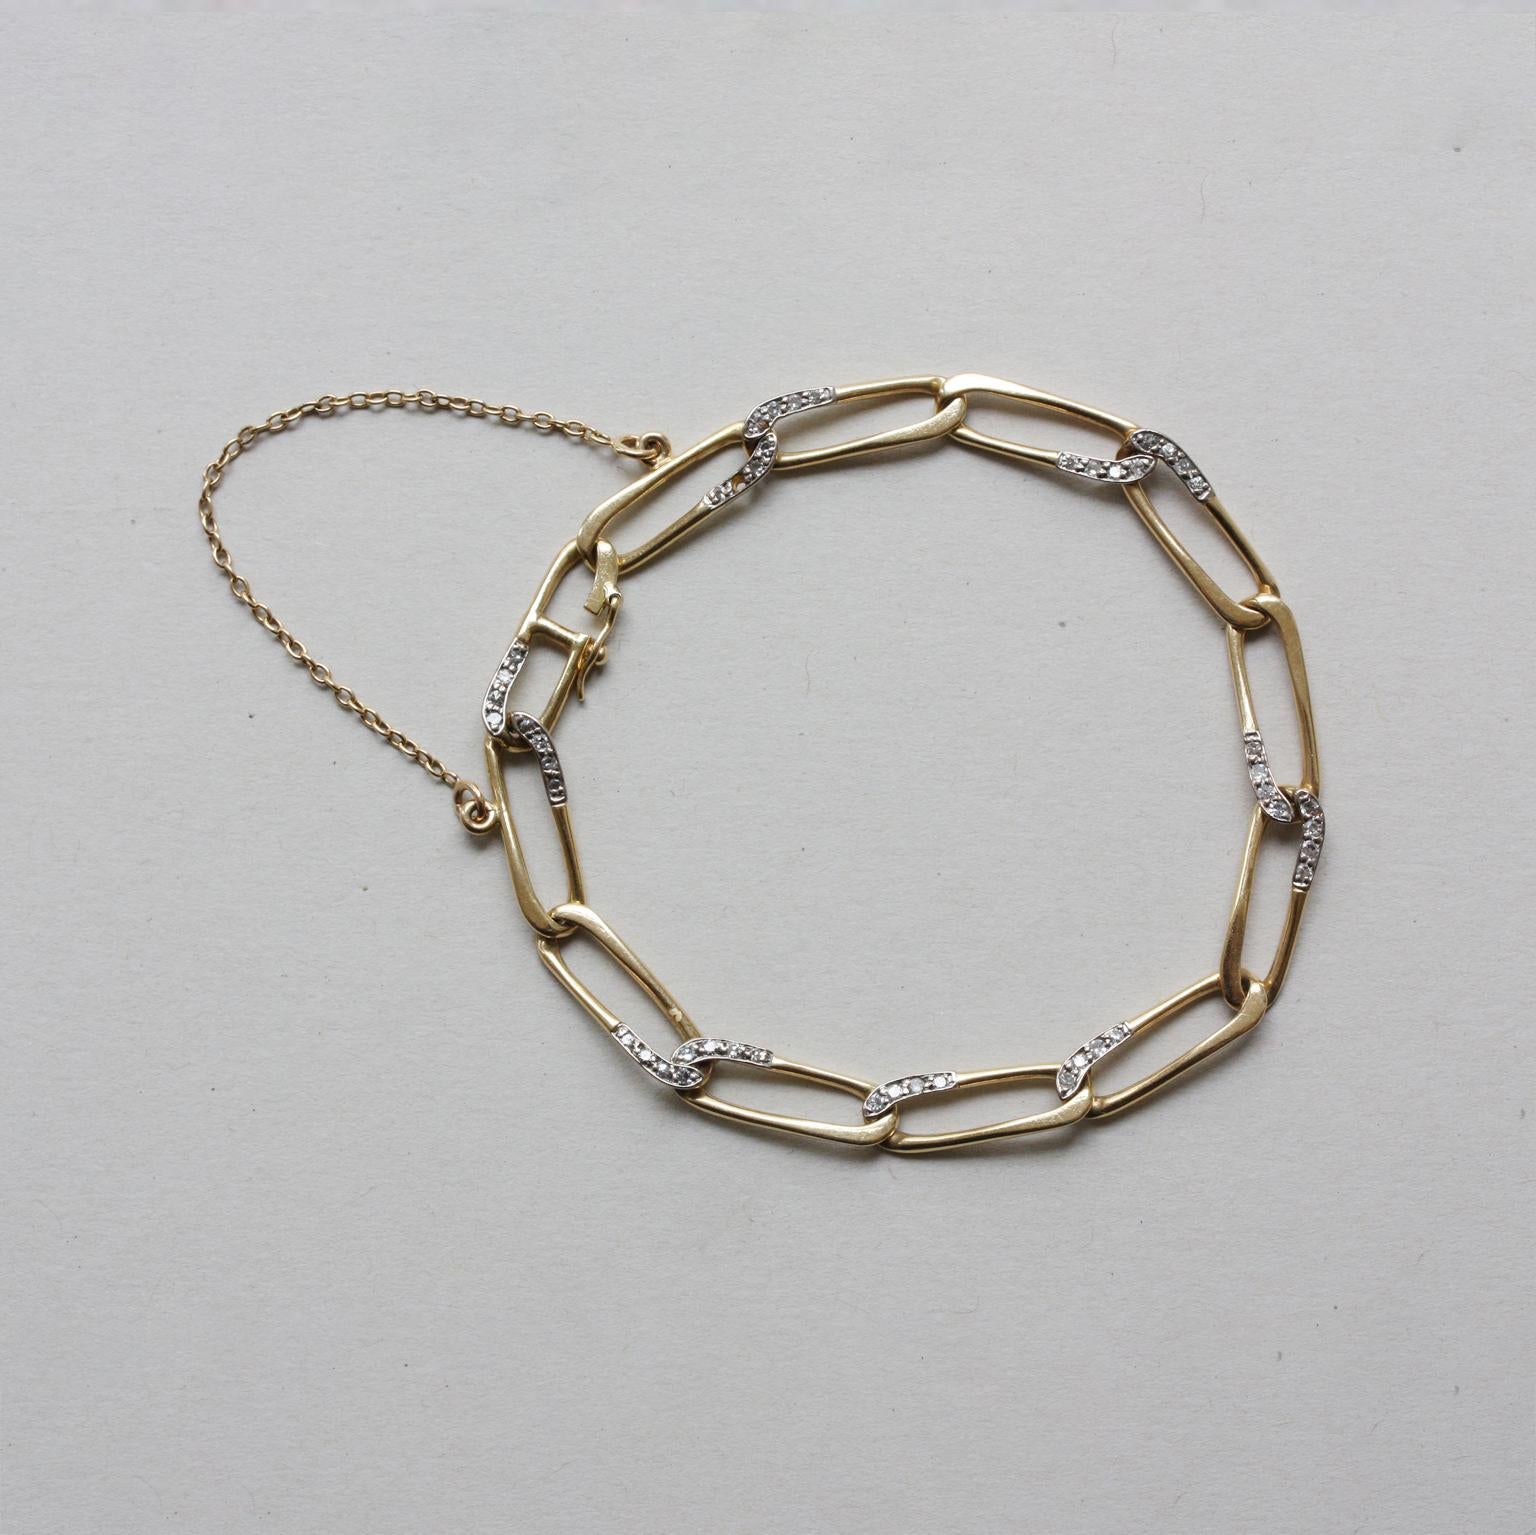 An 18 carat gold and diamond paperclip link bracelet (with safety chain), Signed and numbered: Cartier, 113598.

weight: 12.33 grams
dimensions: 19.5 x 0.6 cm